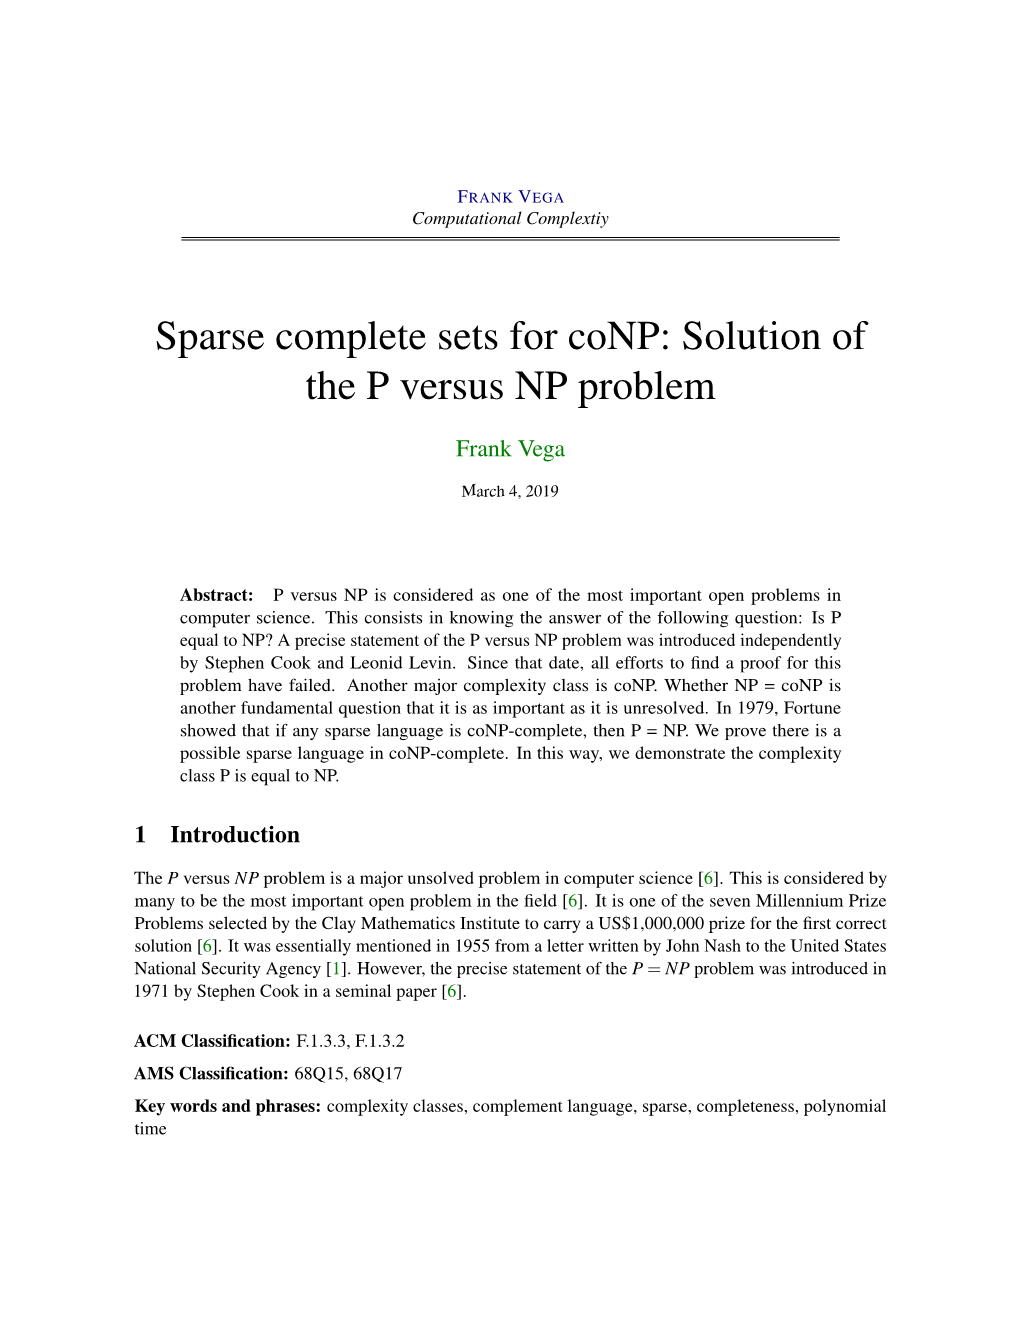 Sparse Complete Sets for Conp: Solution of the P Versus NP Problem